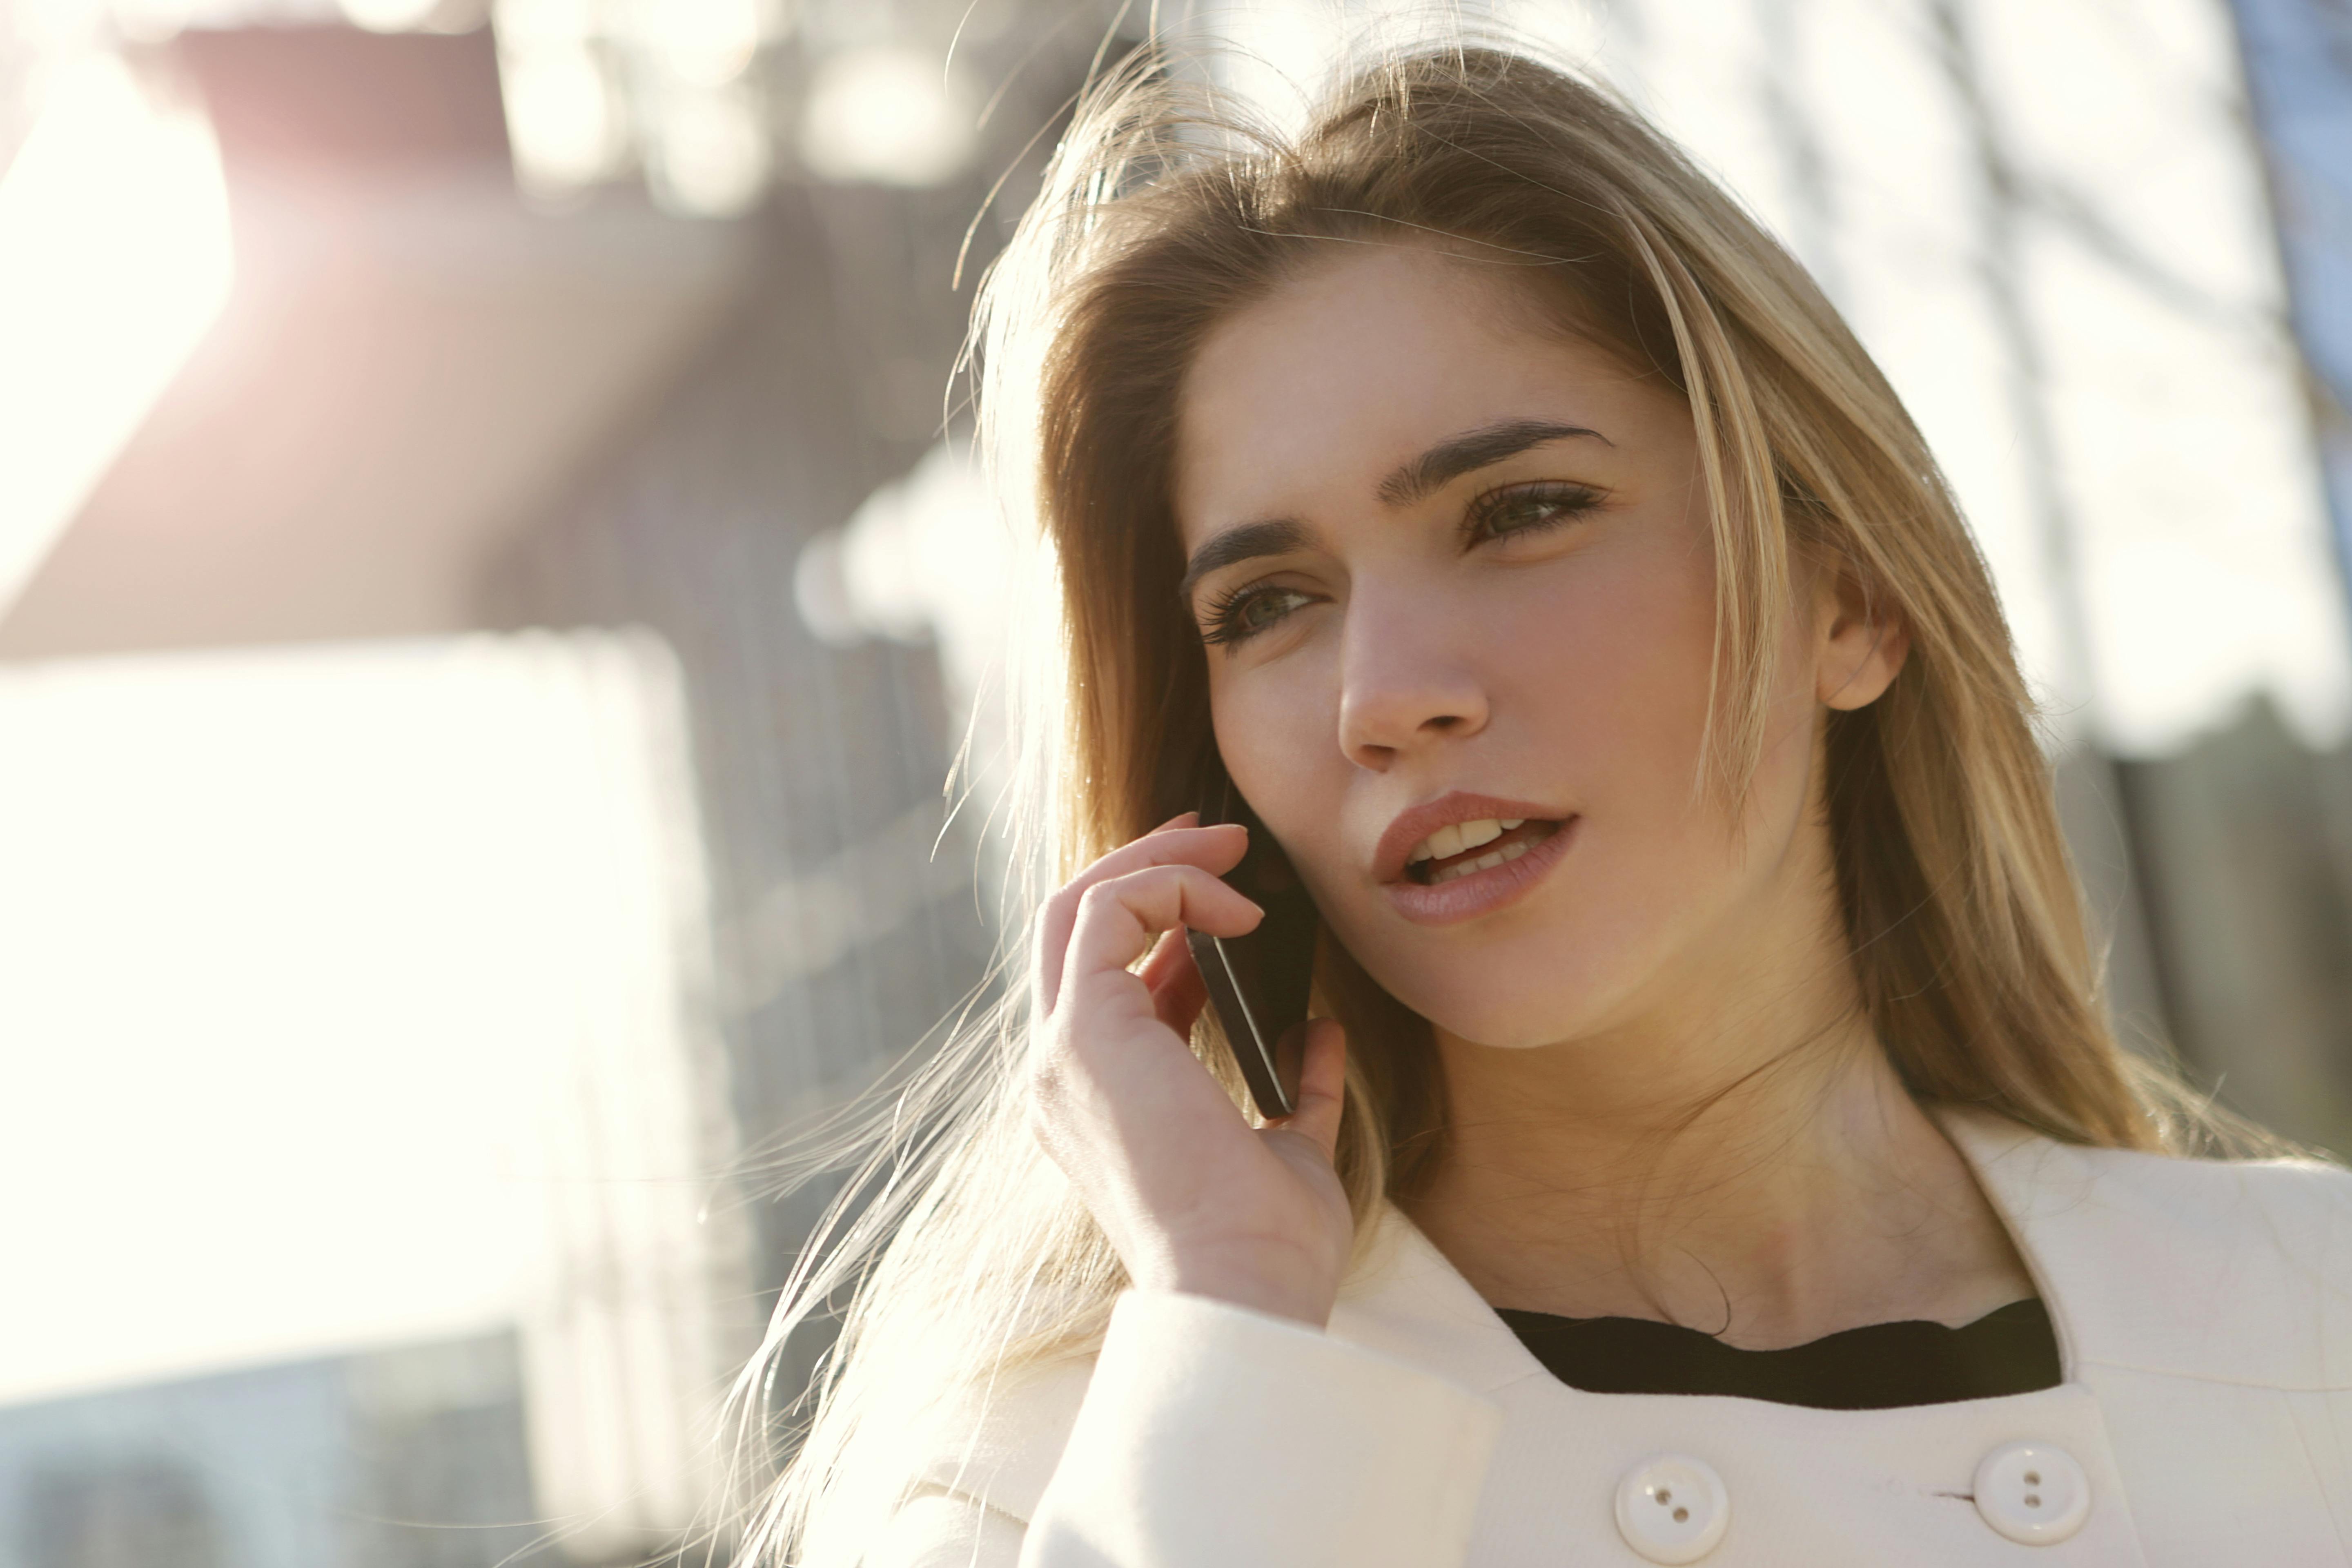 a woman talking on the phone | Source: Pexels